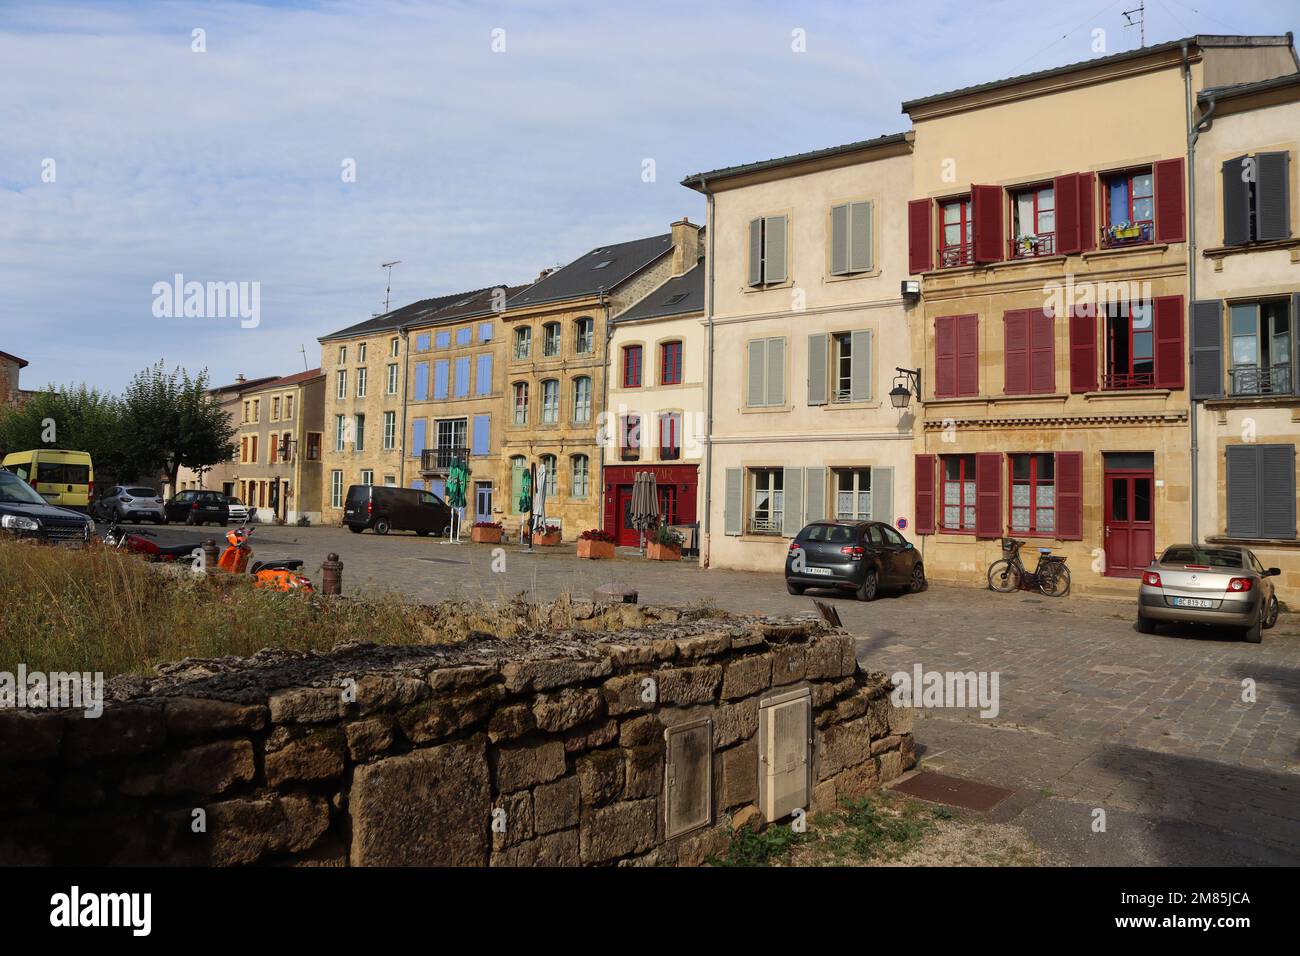 MONTMEDY, FRANCE, 4 AUGUST 2022: Morning view of the historic buildings on Place l'Hotel de ville, Montmedy Citadelle. Montmedy is a popular tourist d Stock Photo